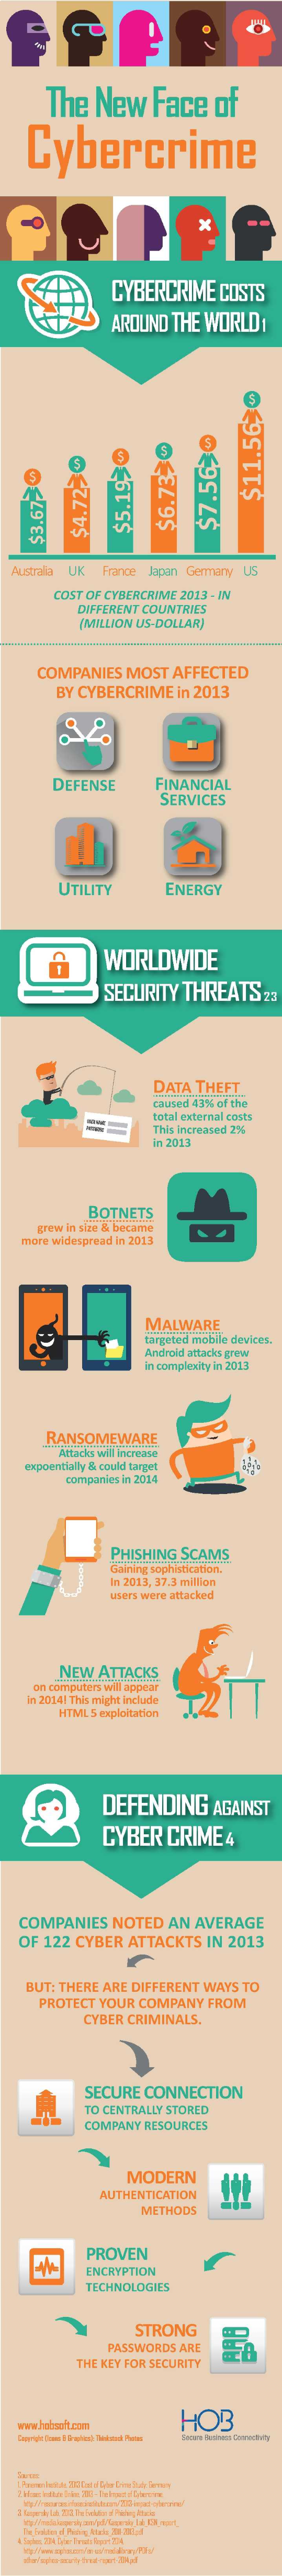 Cybercrime-Infographic-2014-zombieslounge